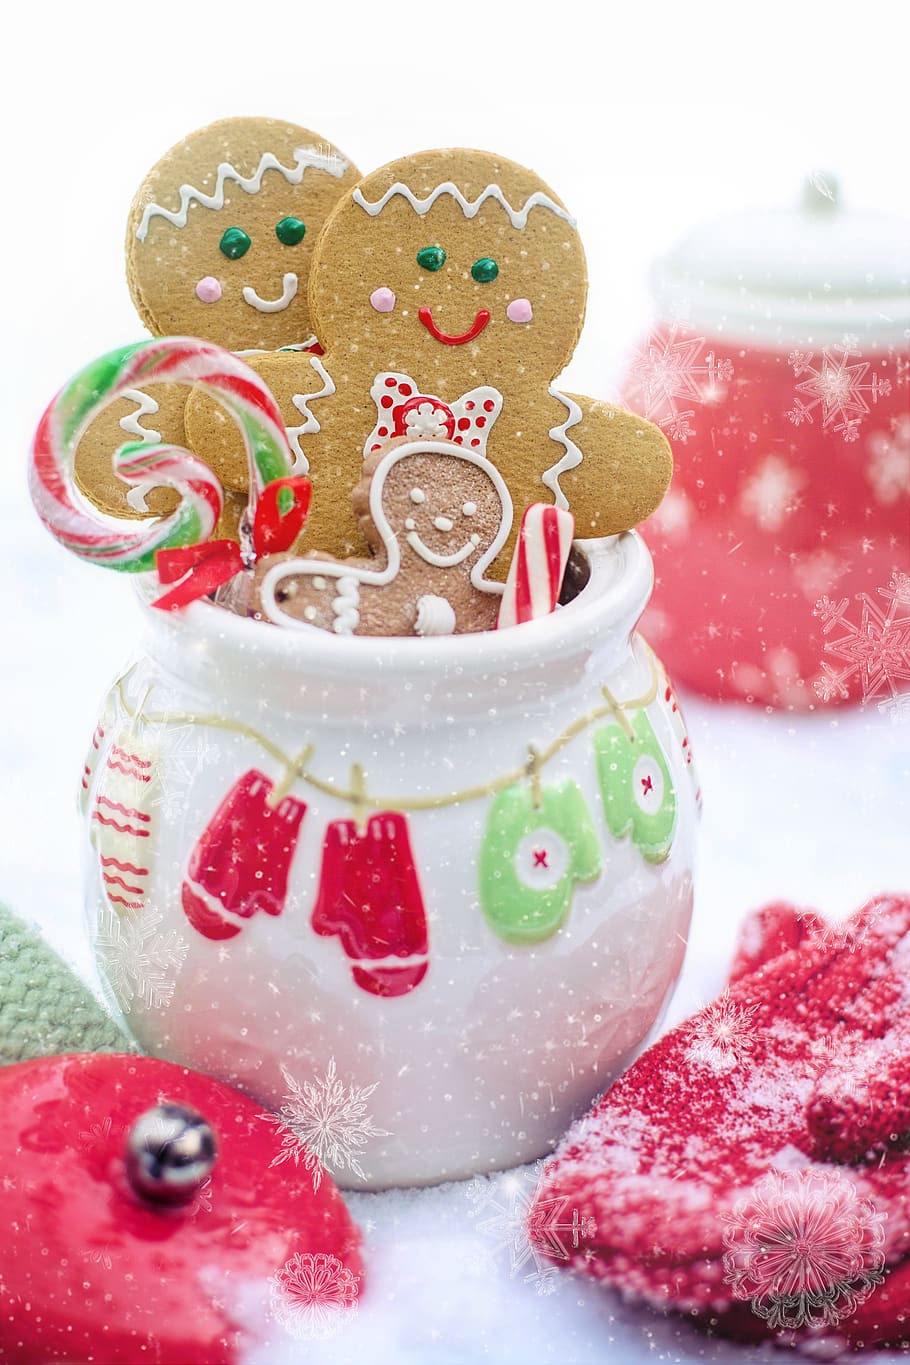 winter, snow, snowy, gingerbread men, cookies, mittens, cold, nature, holiday, christmas